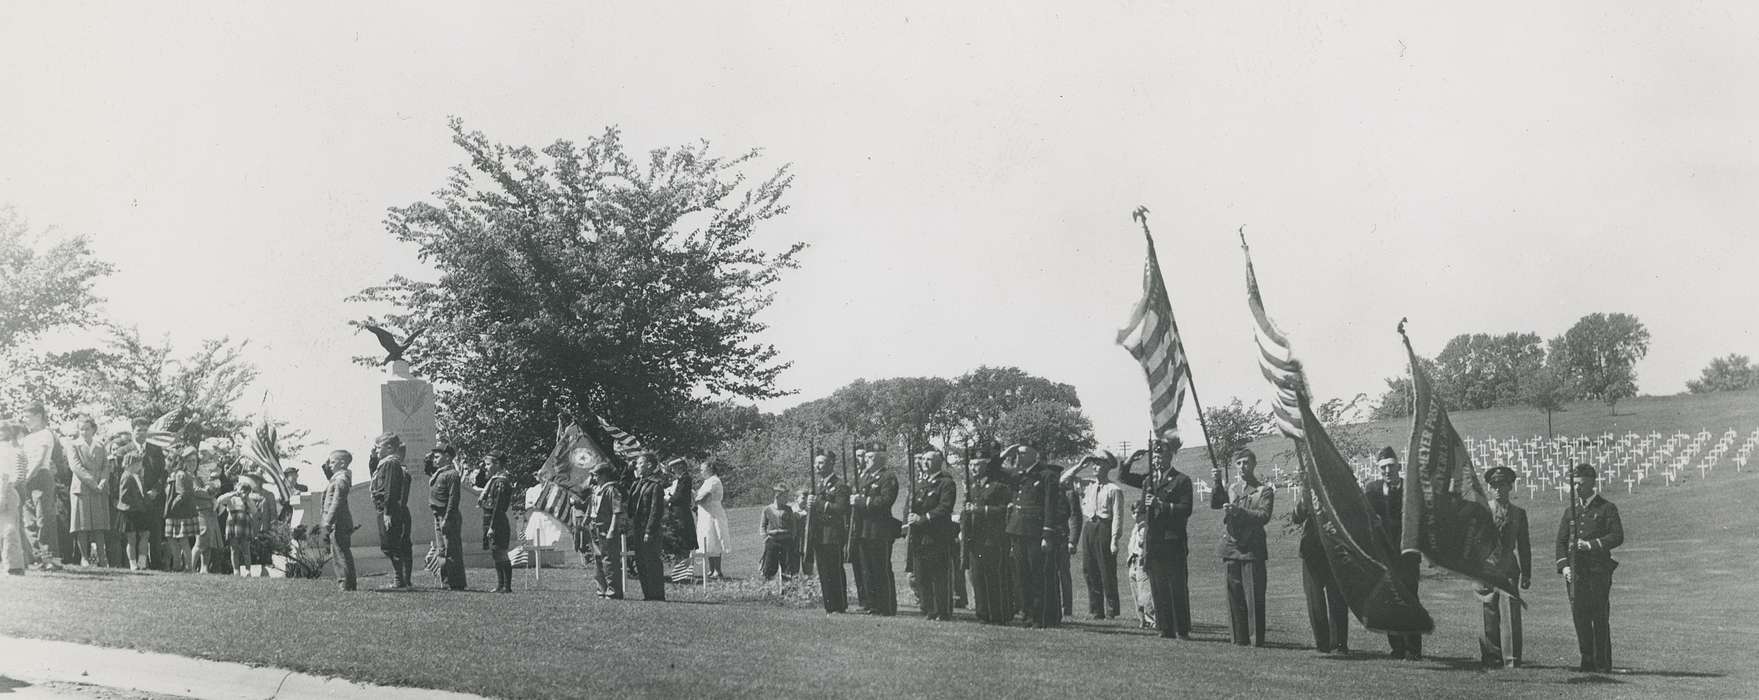 history of Iowa, color guard, memorial day, Military and Veterans, Iowa History, Waverly, IA, american flag, harlington, Cemeteries and Funerals, soldier, tree, salute, Iowa, Waverly Public Library, tombstone